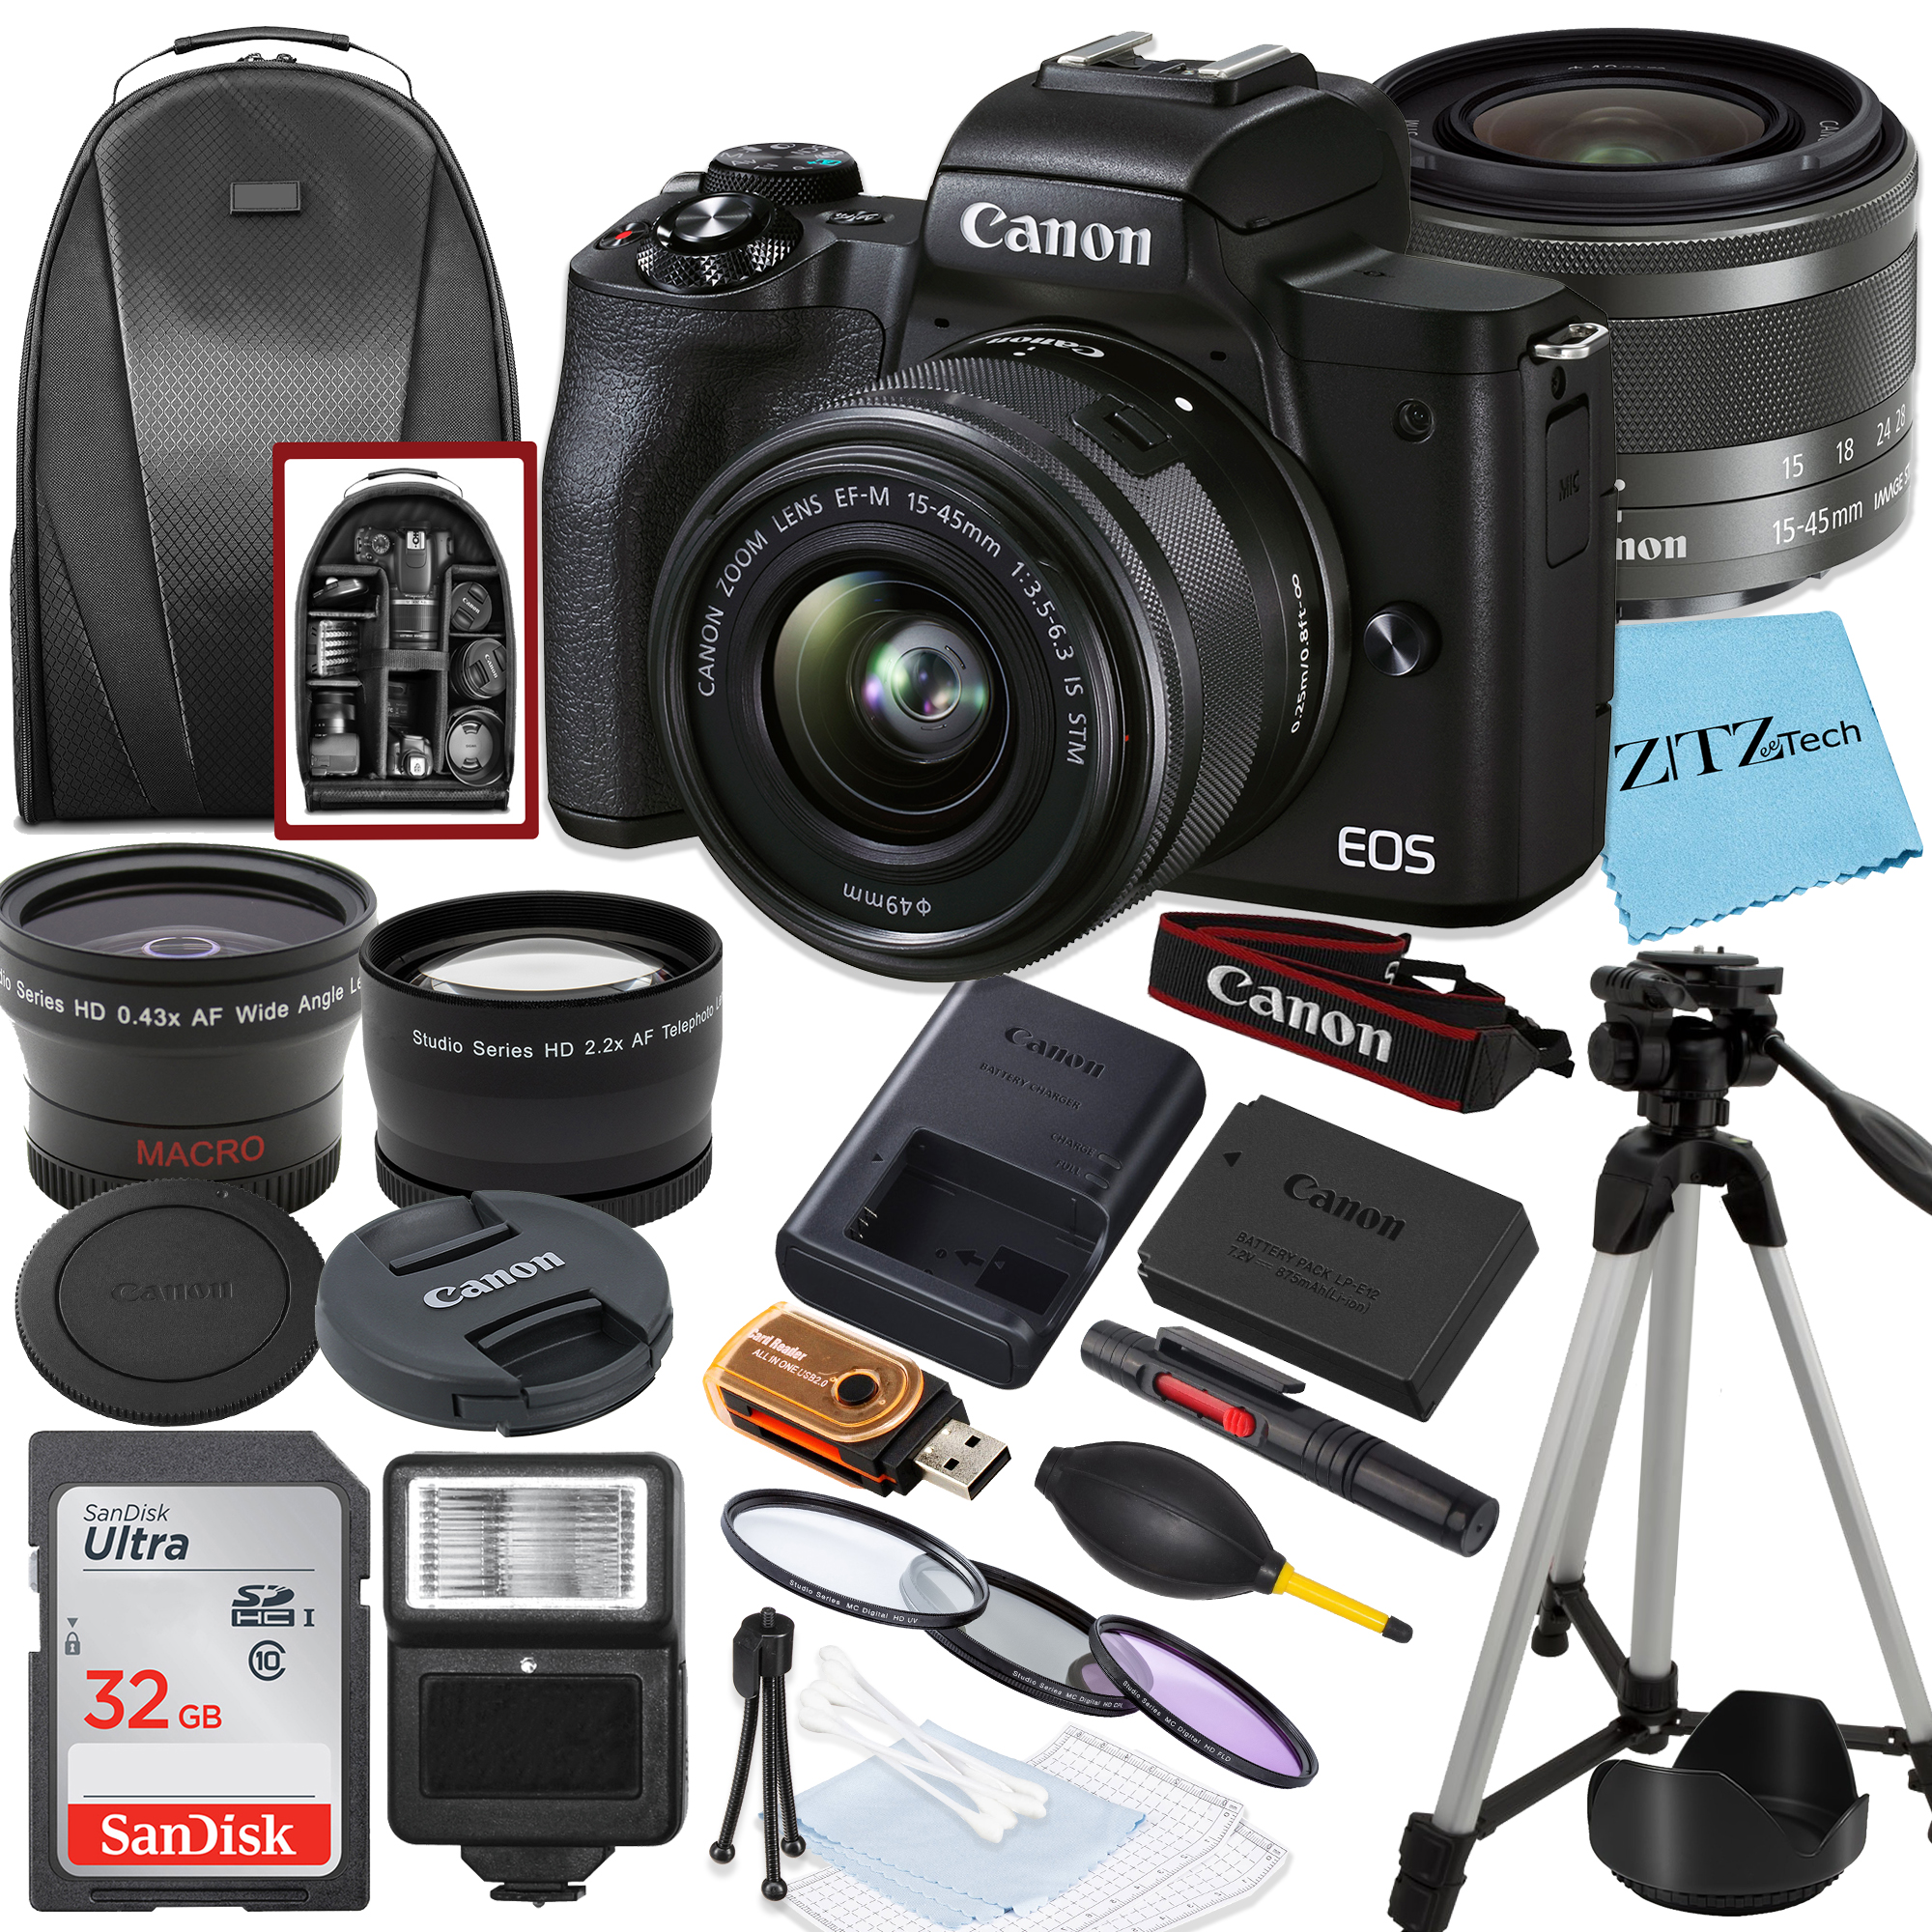 Canon EOS M50 Mark II Mirrorless Camera Bundle with 15-45mm Lens, SanDisk 32GB Memory Card, Tripod, Flash, Backpack and ZeeTech Accessory Bundle